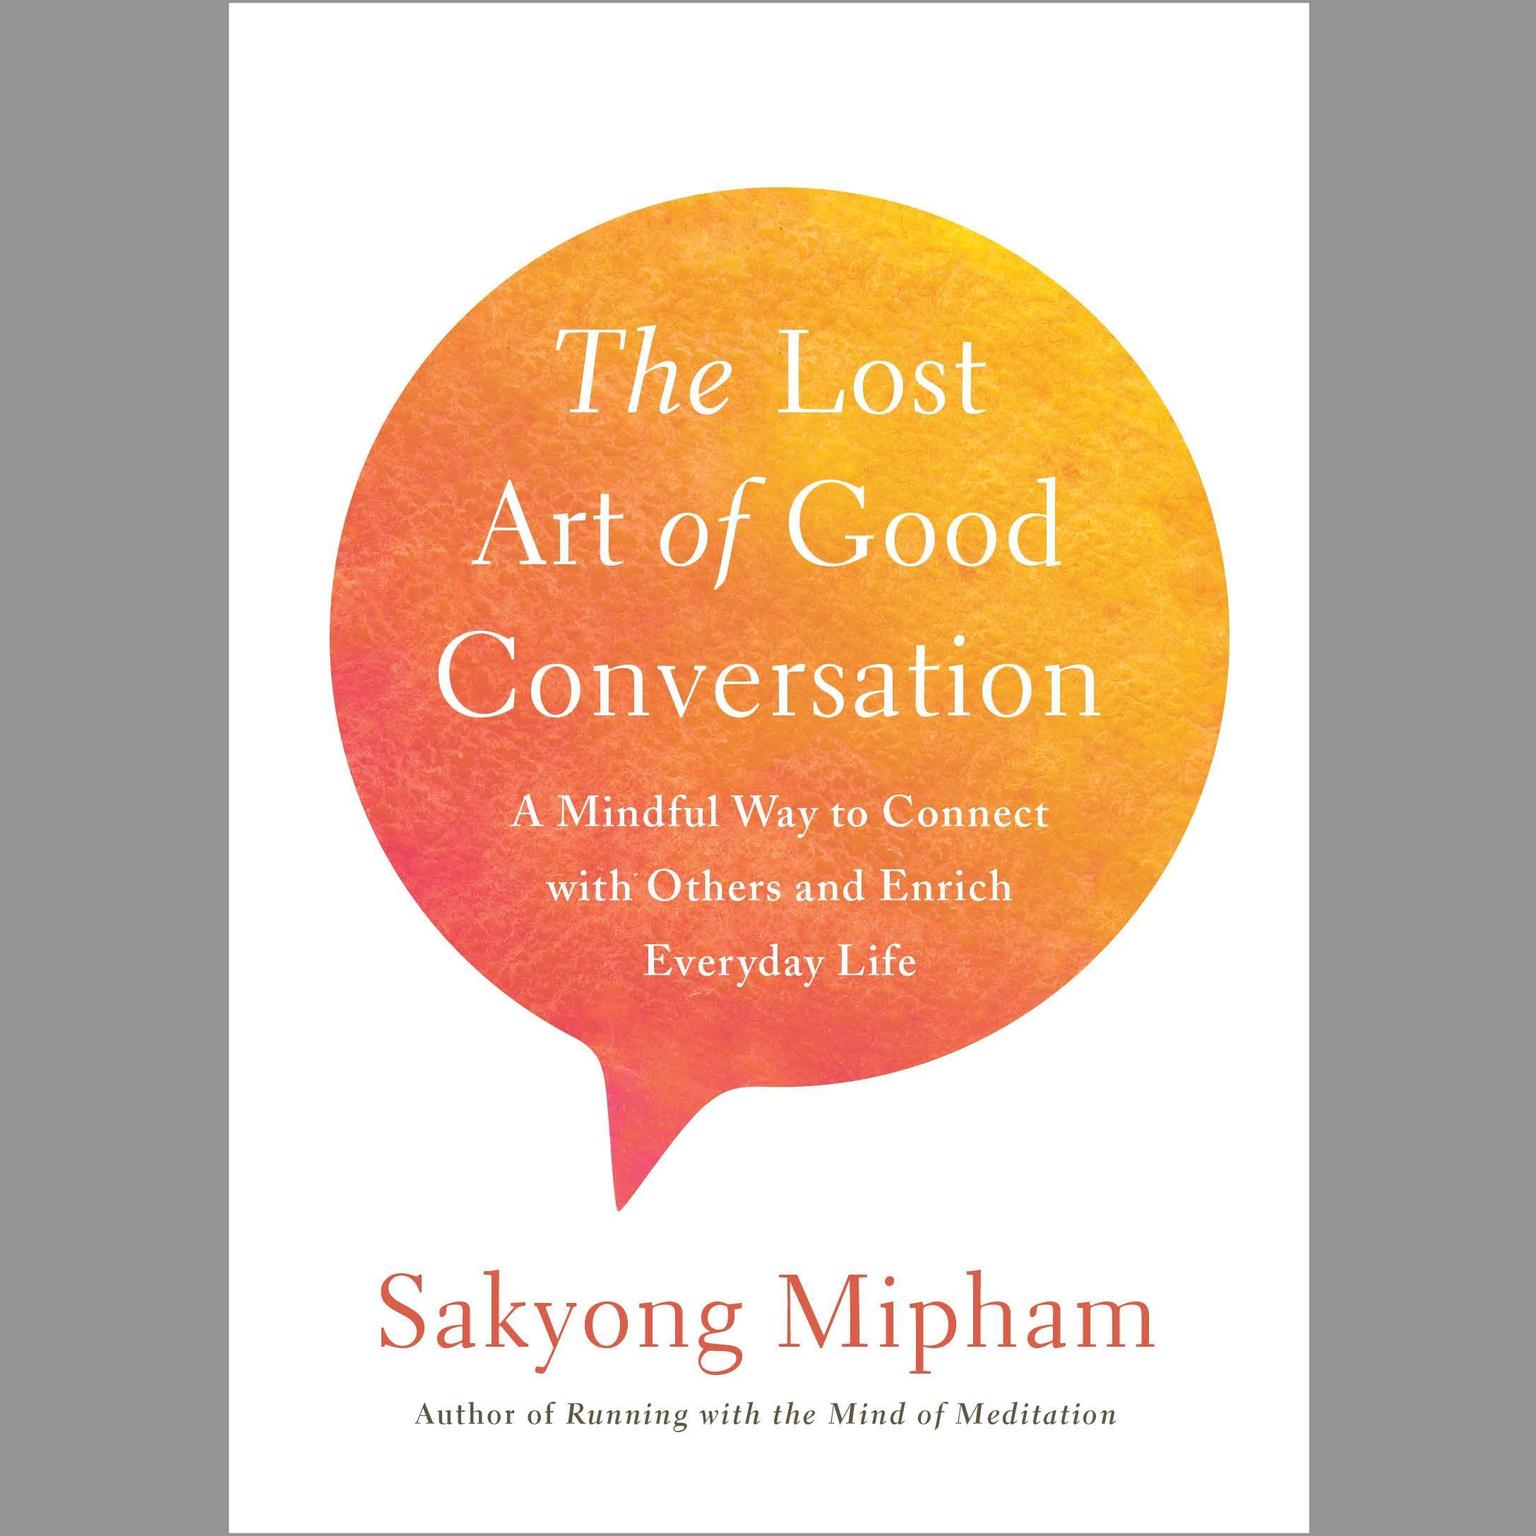 The Lost Art of Good Conversation: A Mindful Way to Connect with Others and Enrich Everyday Life Audiobook, by Sakyong Mipham